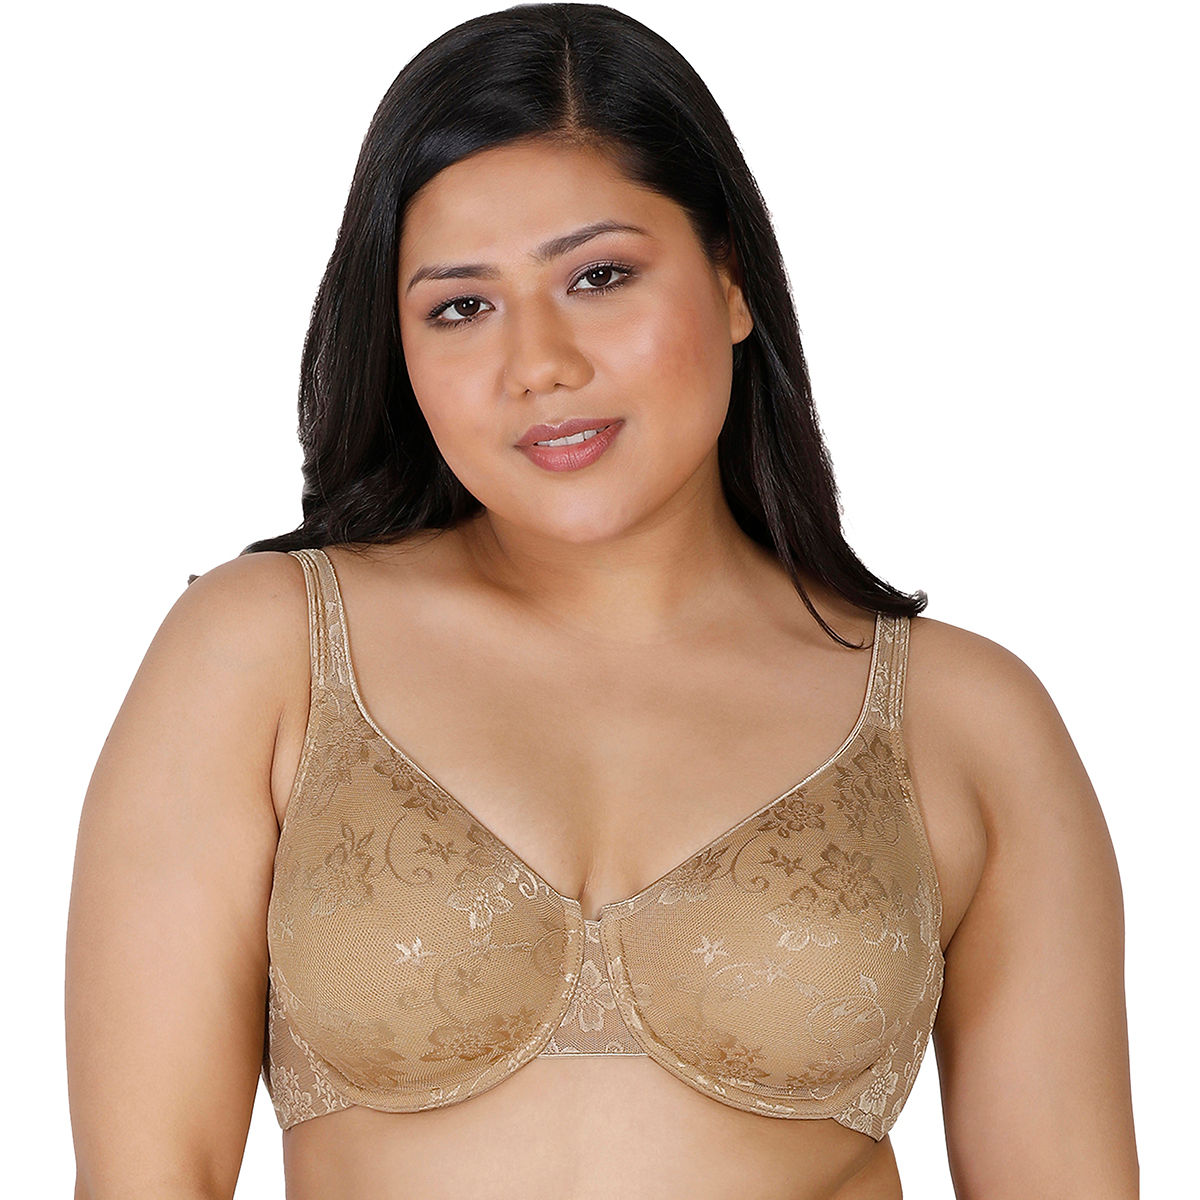 Enamor F035 Support Bra - Non-Padded Wired High Coverage 38c Black